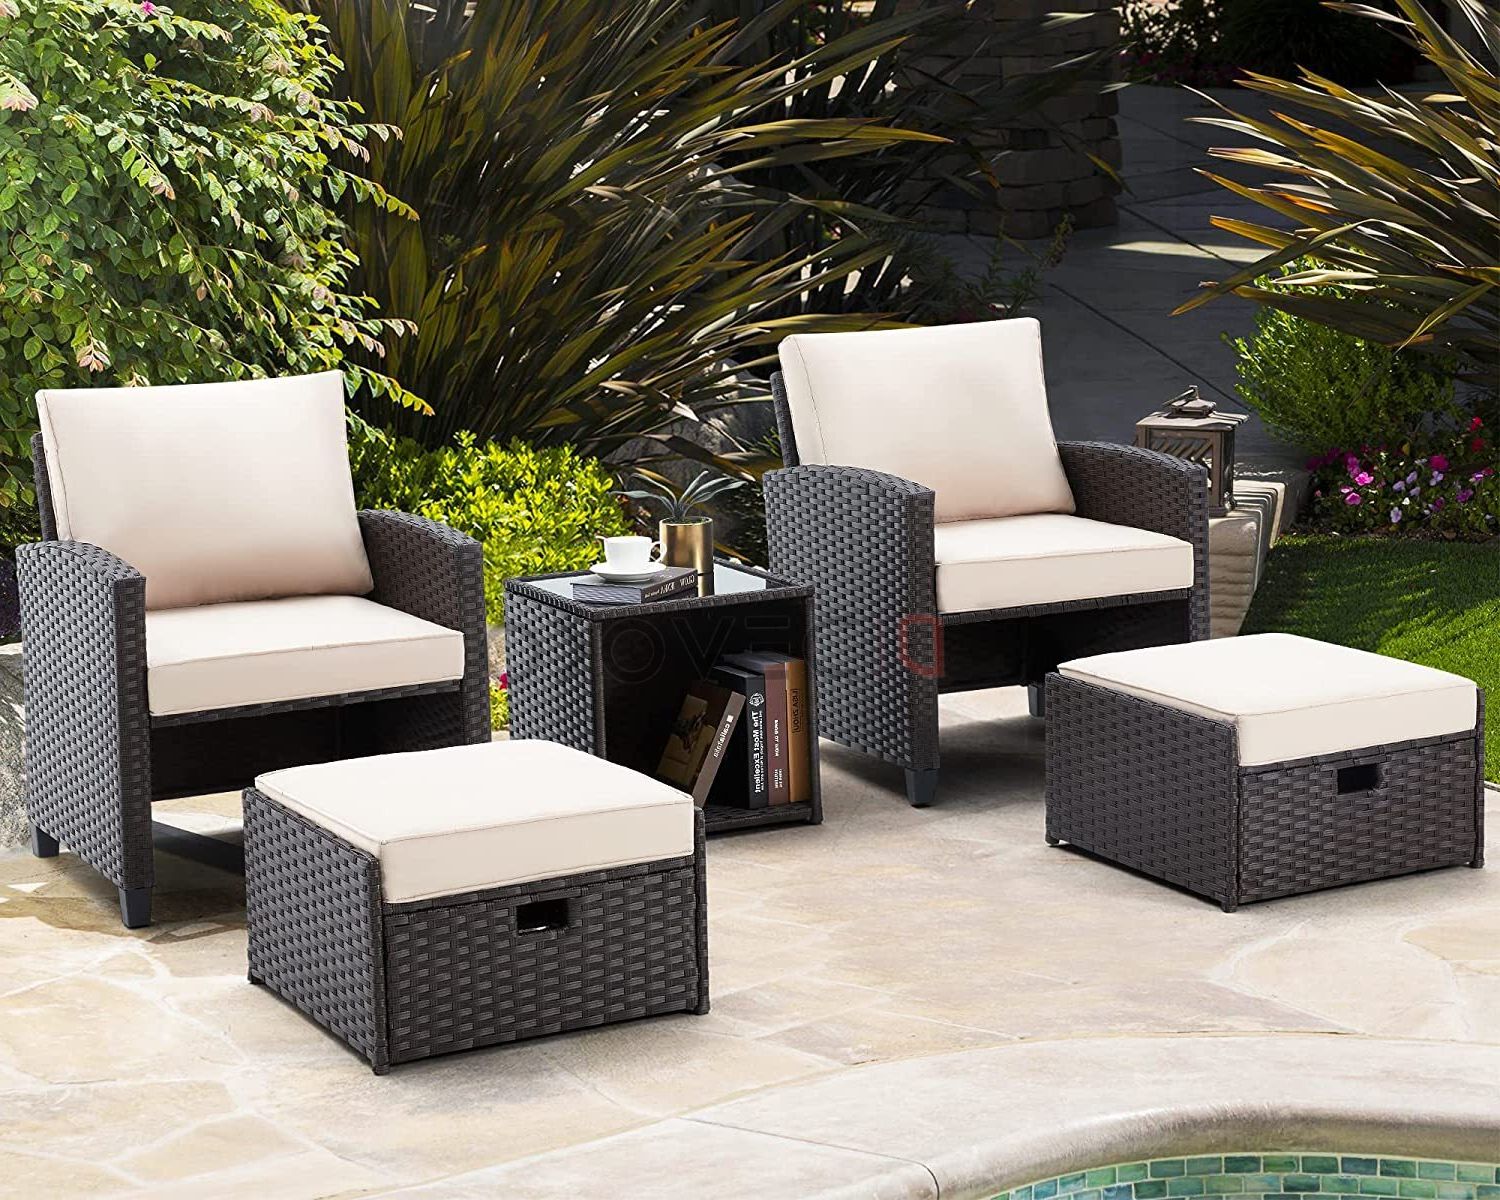 Outdoor Patio Furniture Wicker Rattan Conversation Set With Cushioned Chairs,  Ottoman Set, Table For Lawn, Pool, Balcony (dark Brown & Cream Color) –  Devoko Outdoor In Most Up To Date Brown Wicker Chairs With Ottoman (View 10 of 15)